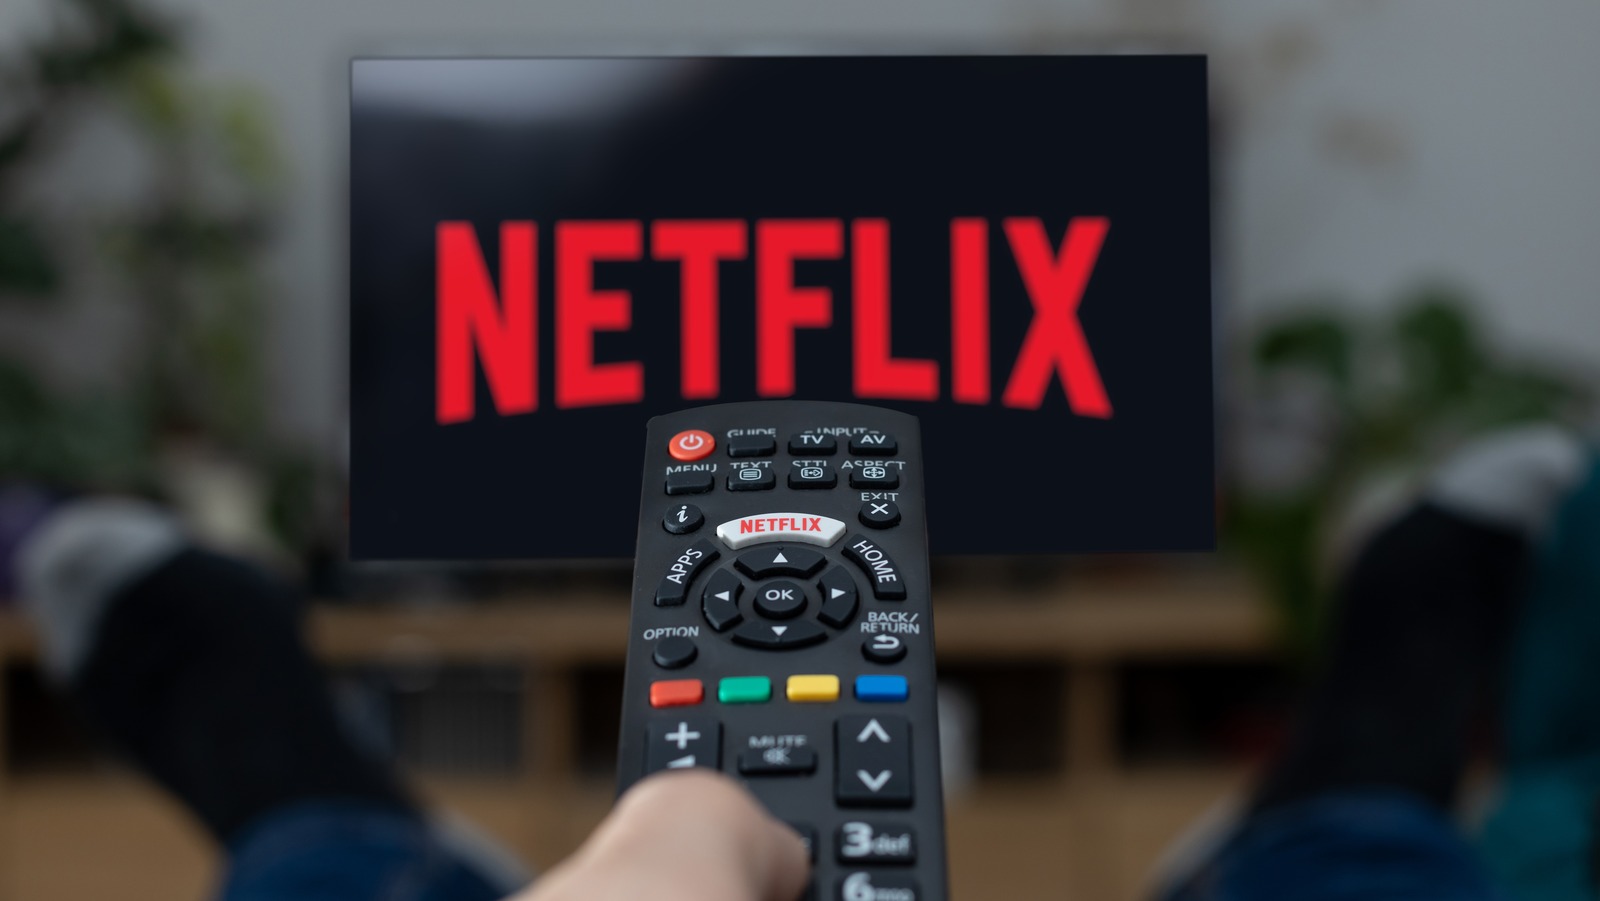 Netflix Basic With Ads Plan Pricing, Launch Date Revealed